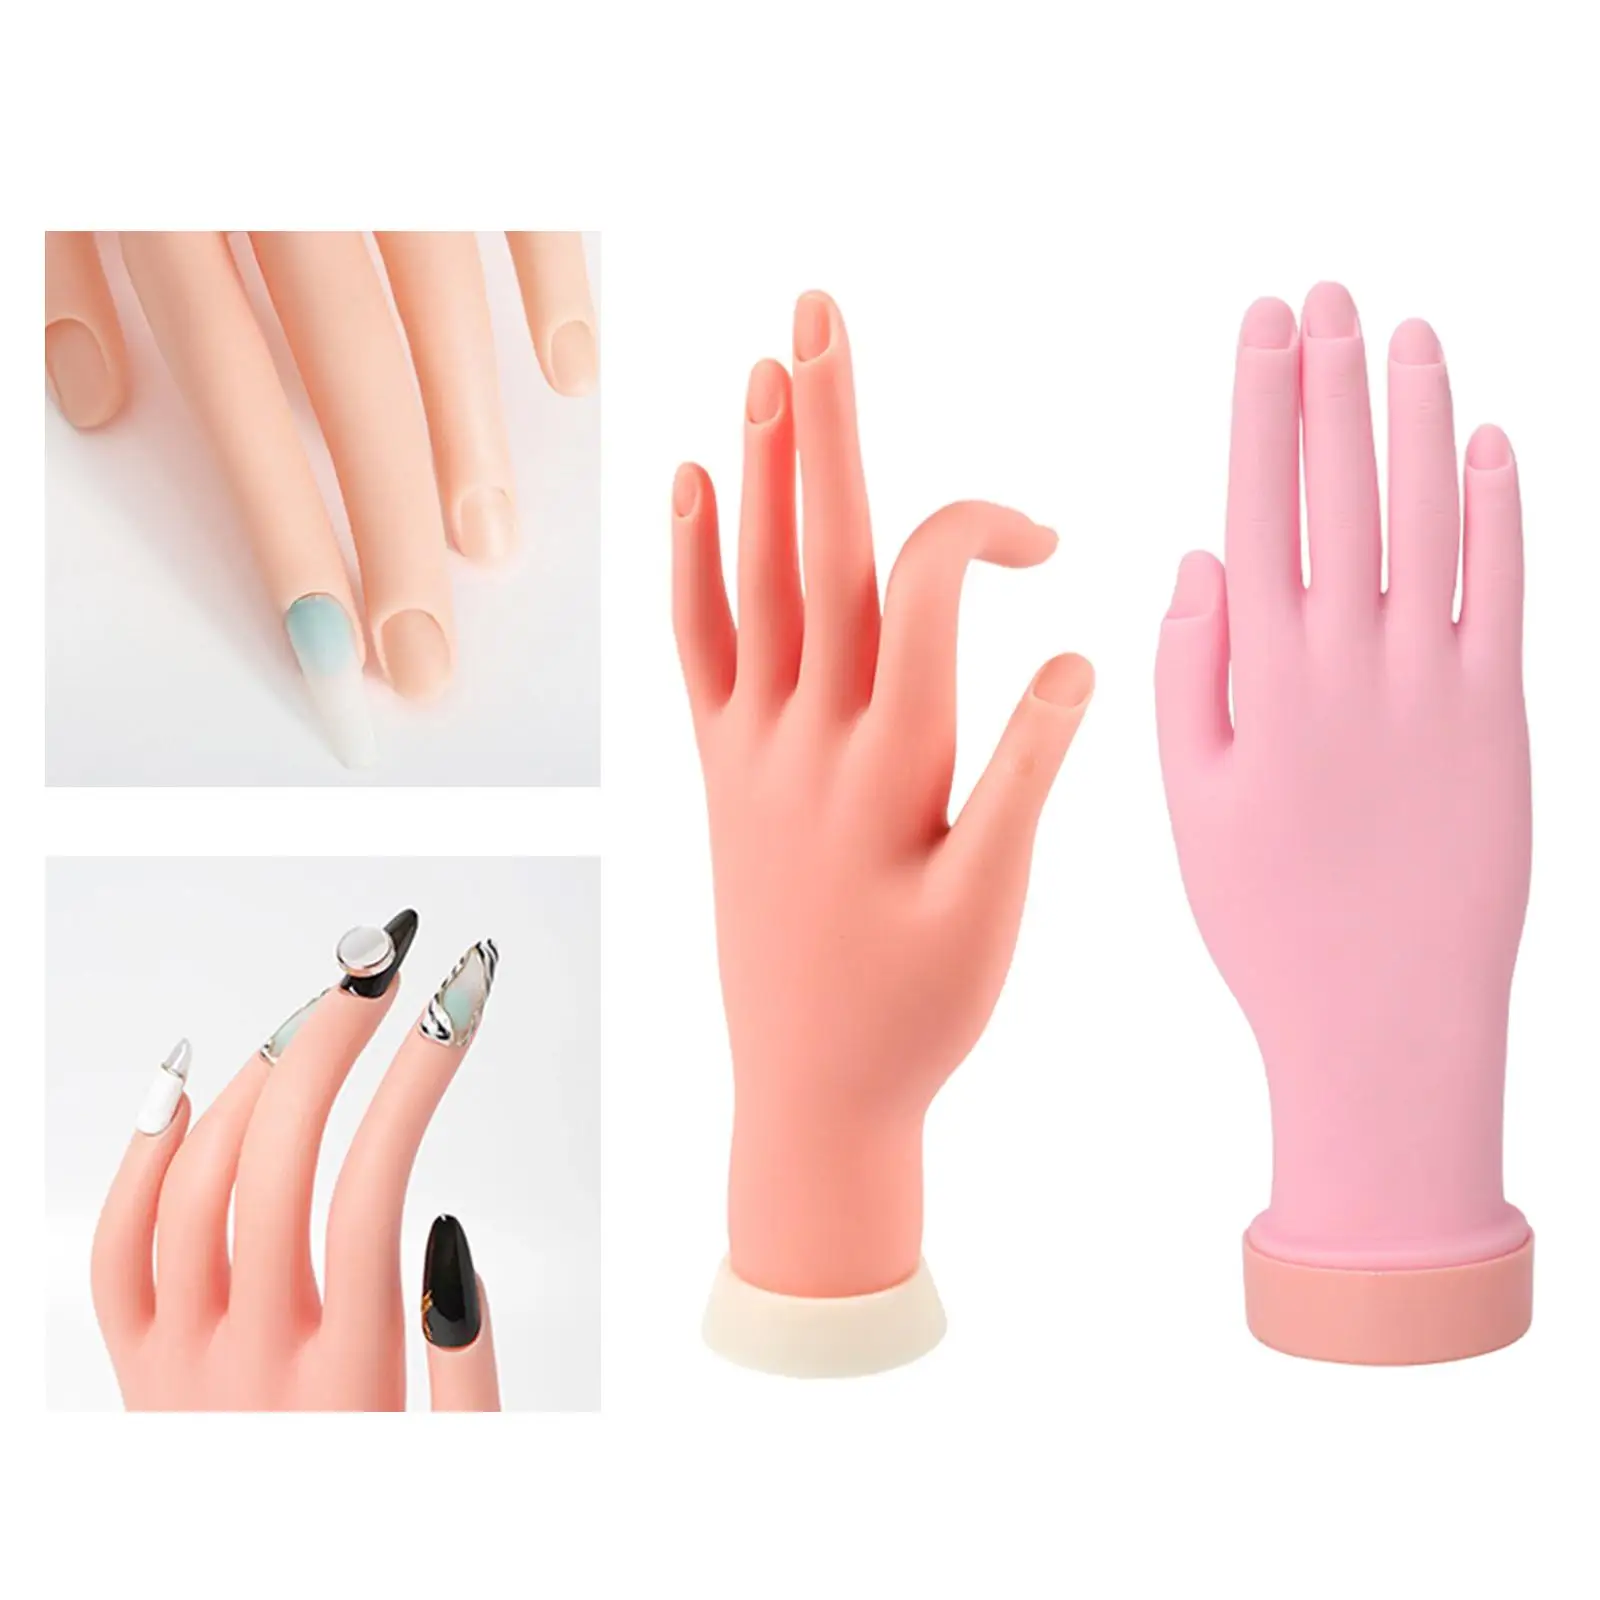 Nail Training Hand Manicure Practice Nail Technician Beginner Silica 